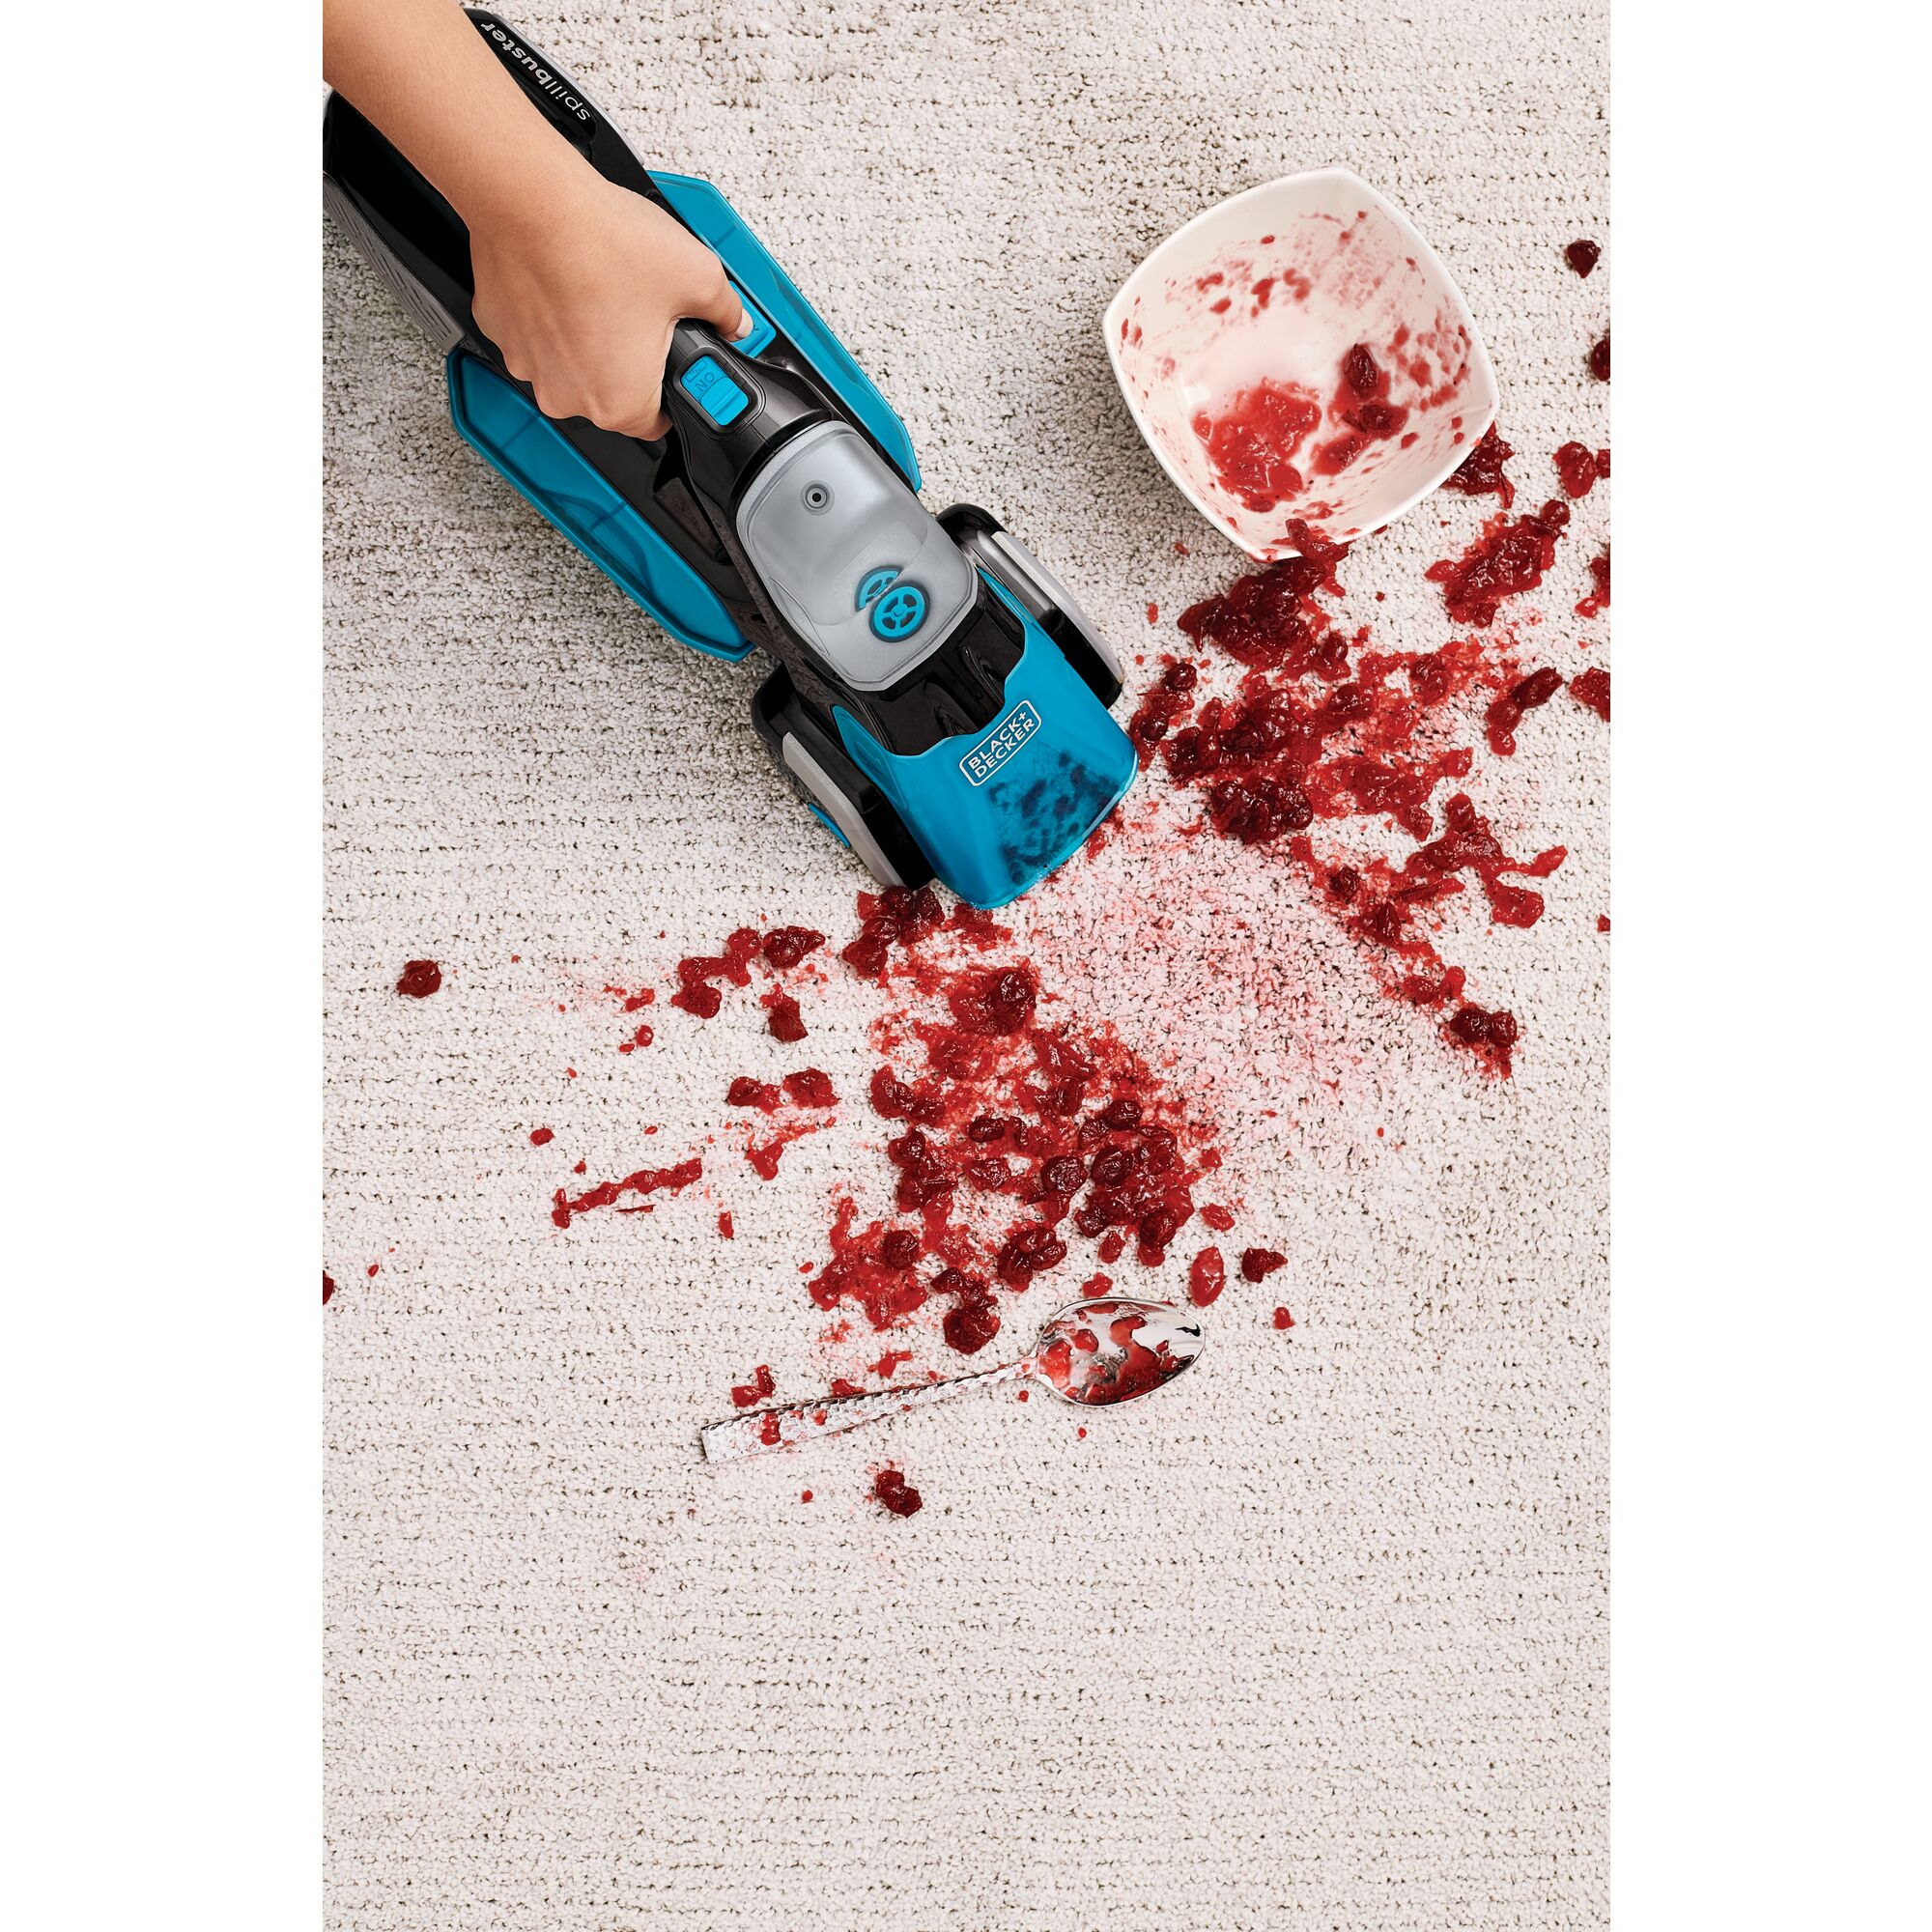 Spillbuster Cordless Spill and Spot Cleaner with Powered Scrub Brush being used to clean mess on a carpet.